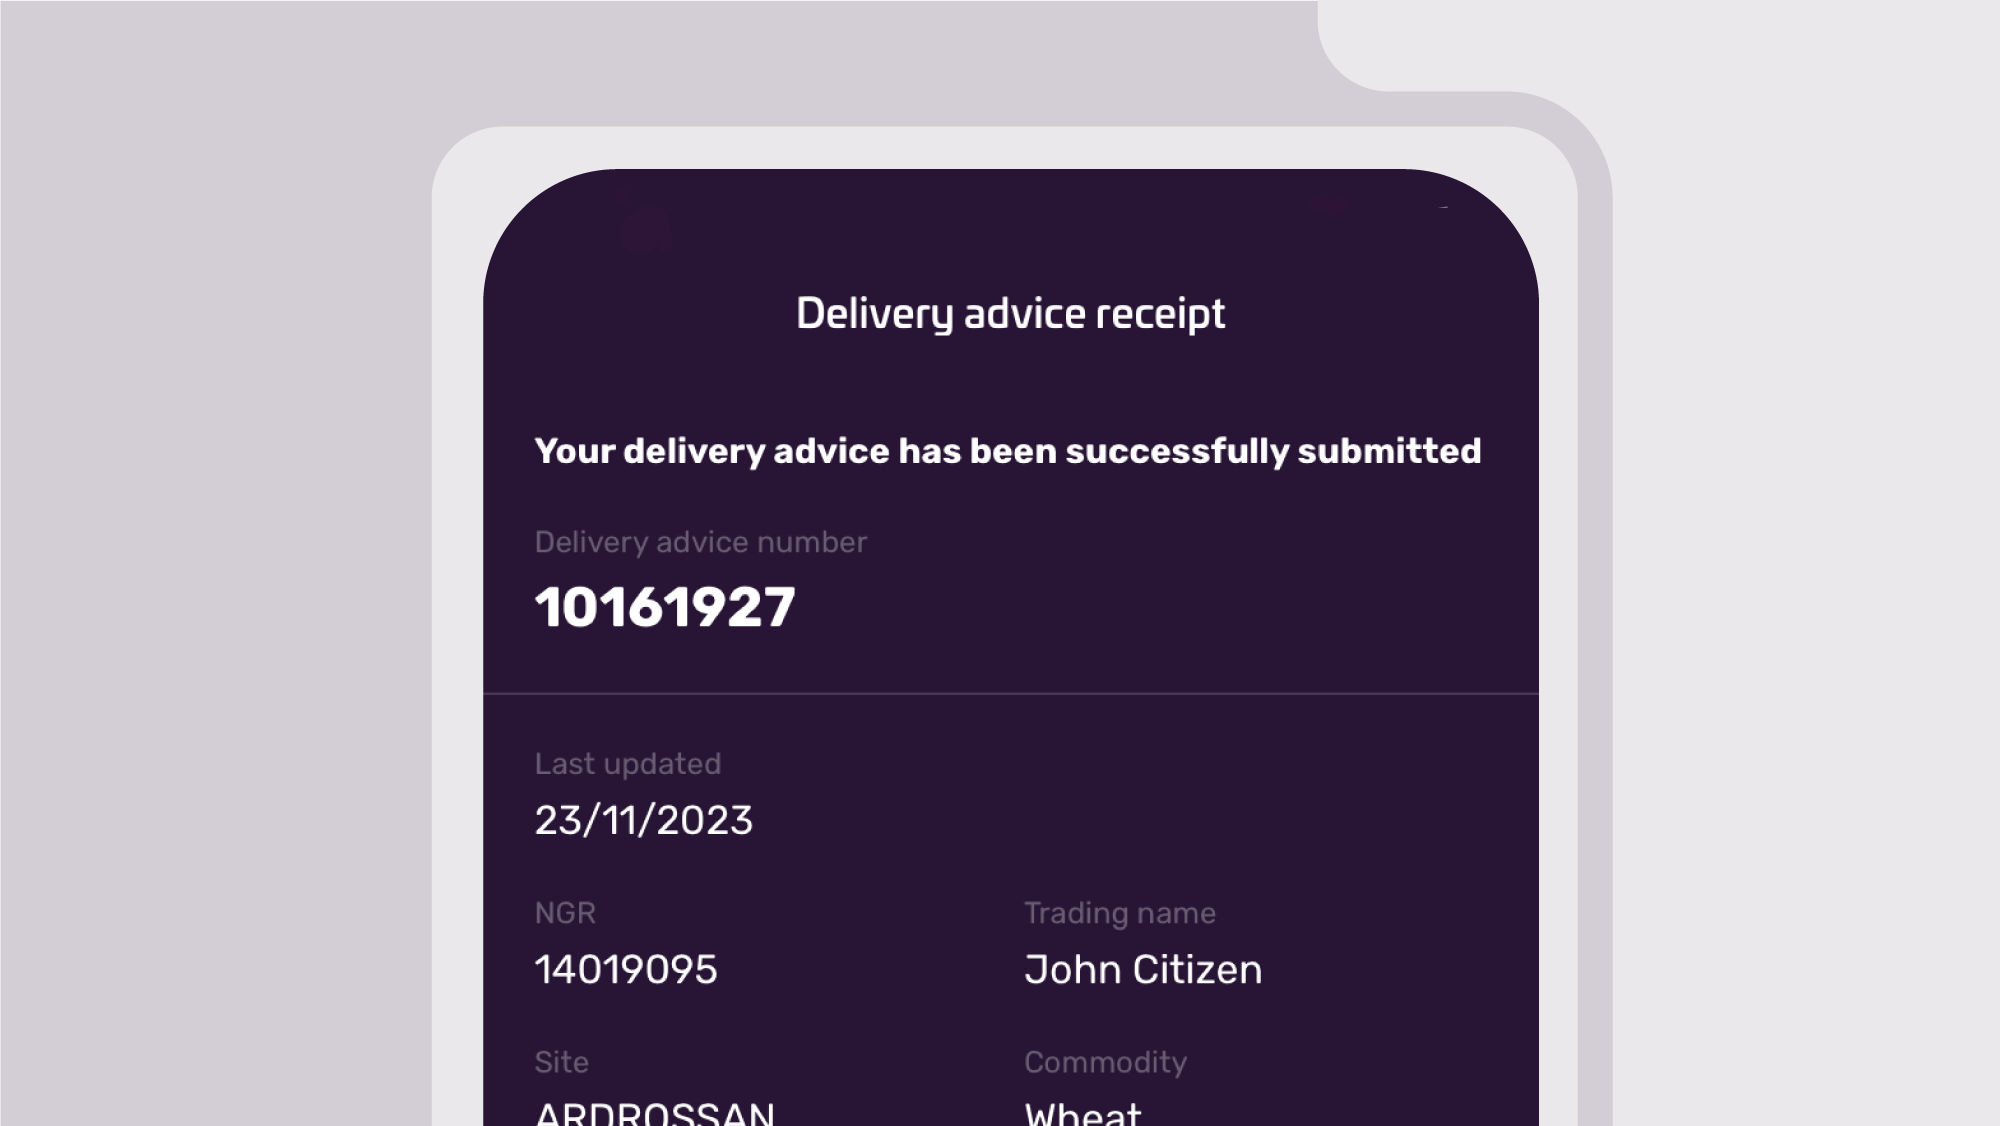 Delivery-advice-receipt-web-image_2.png